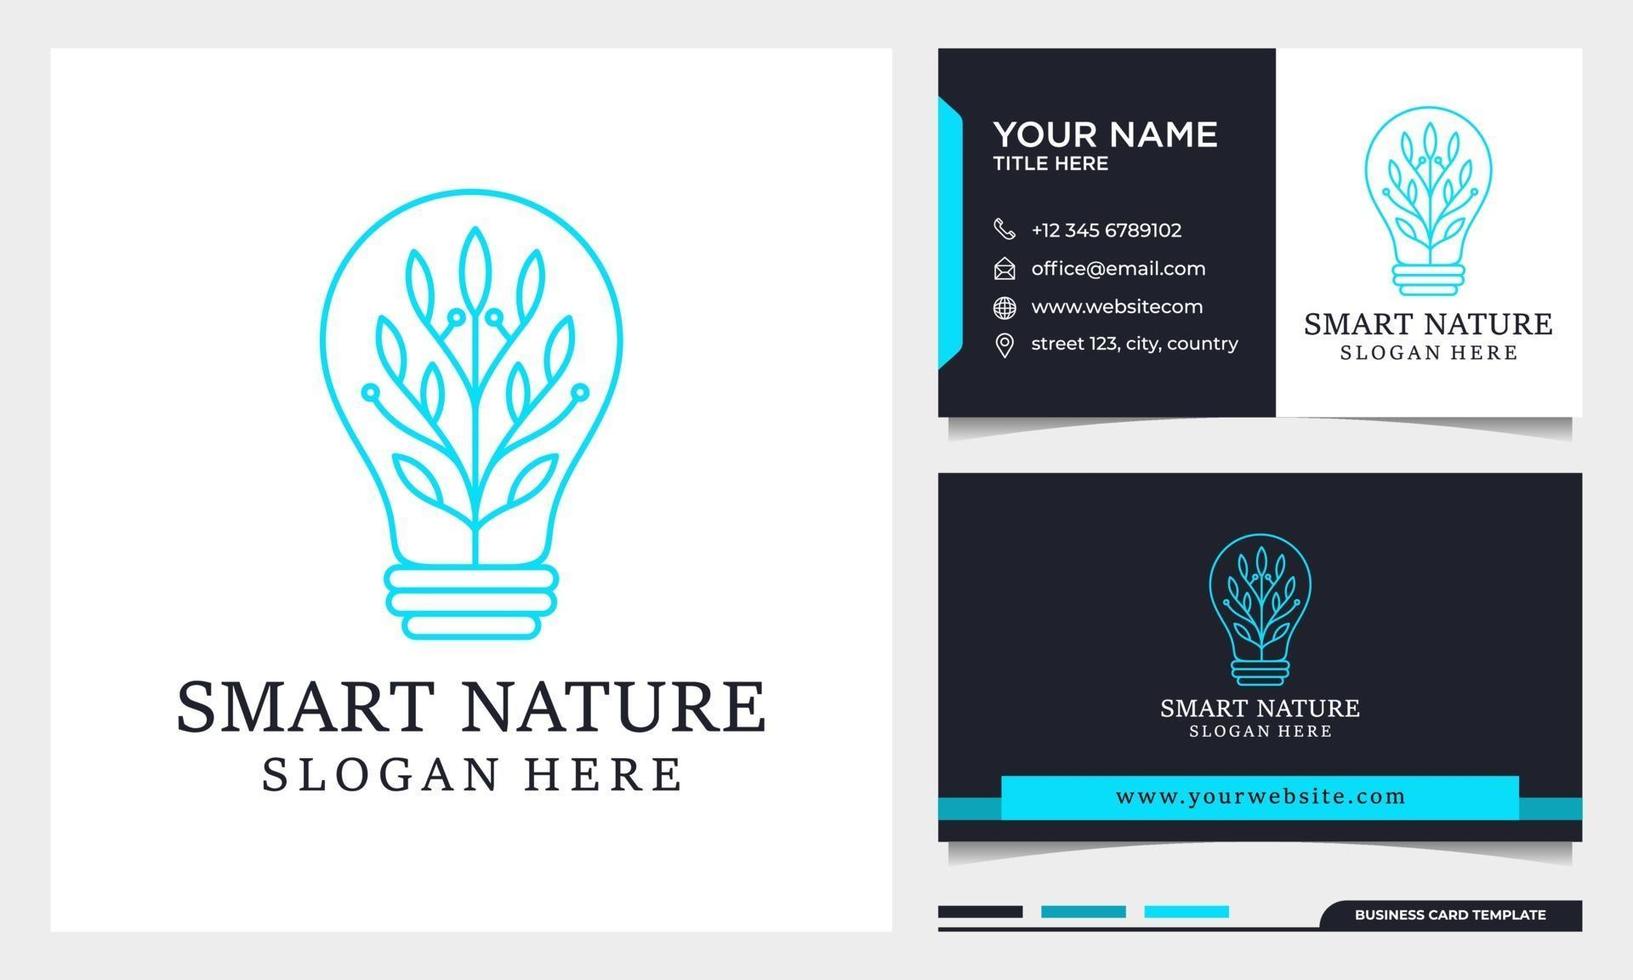 Bulb Beauty logo design illustration and business card template vector